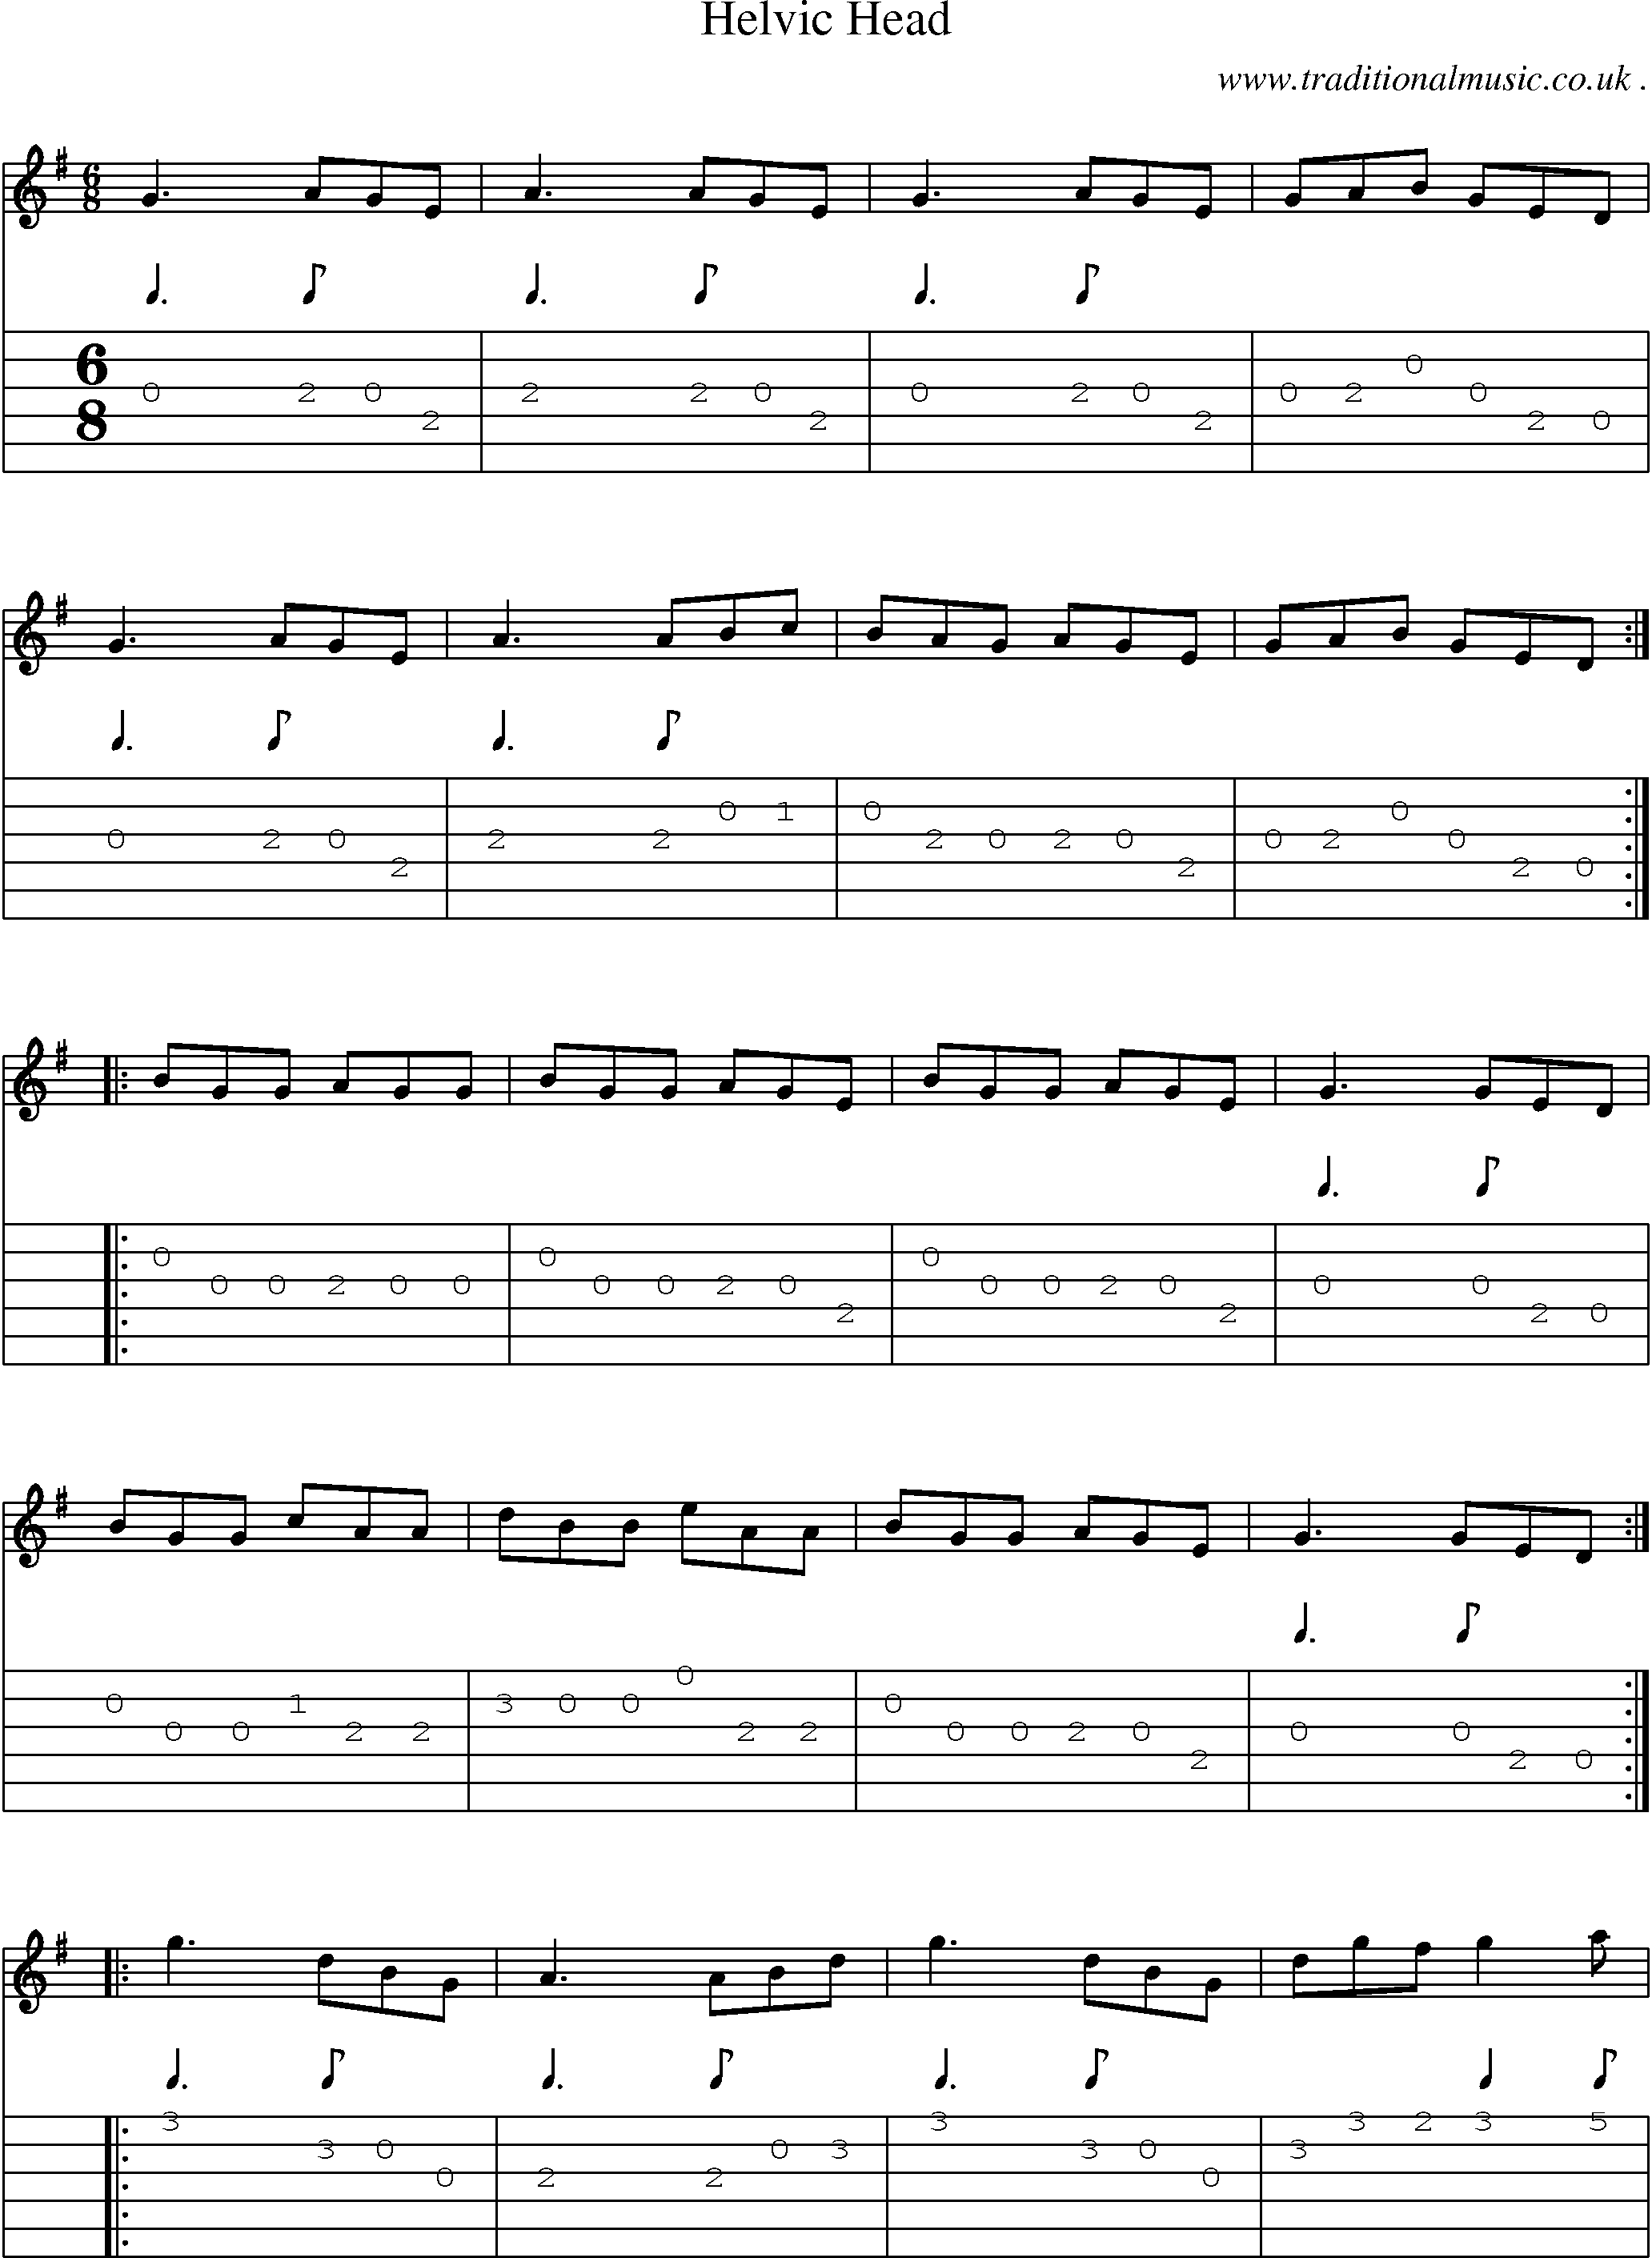 Sheet-Music and Guitar Tabs for Helvic Head